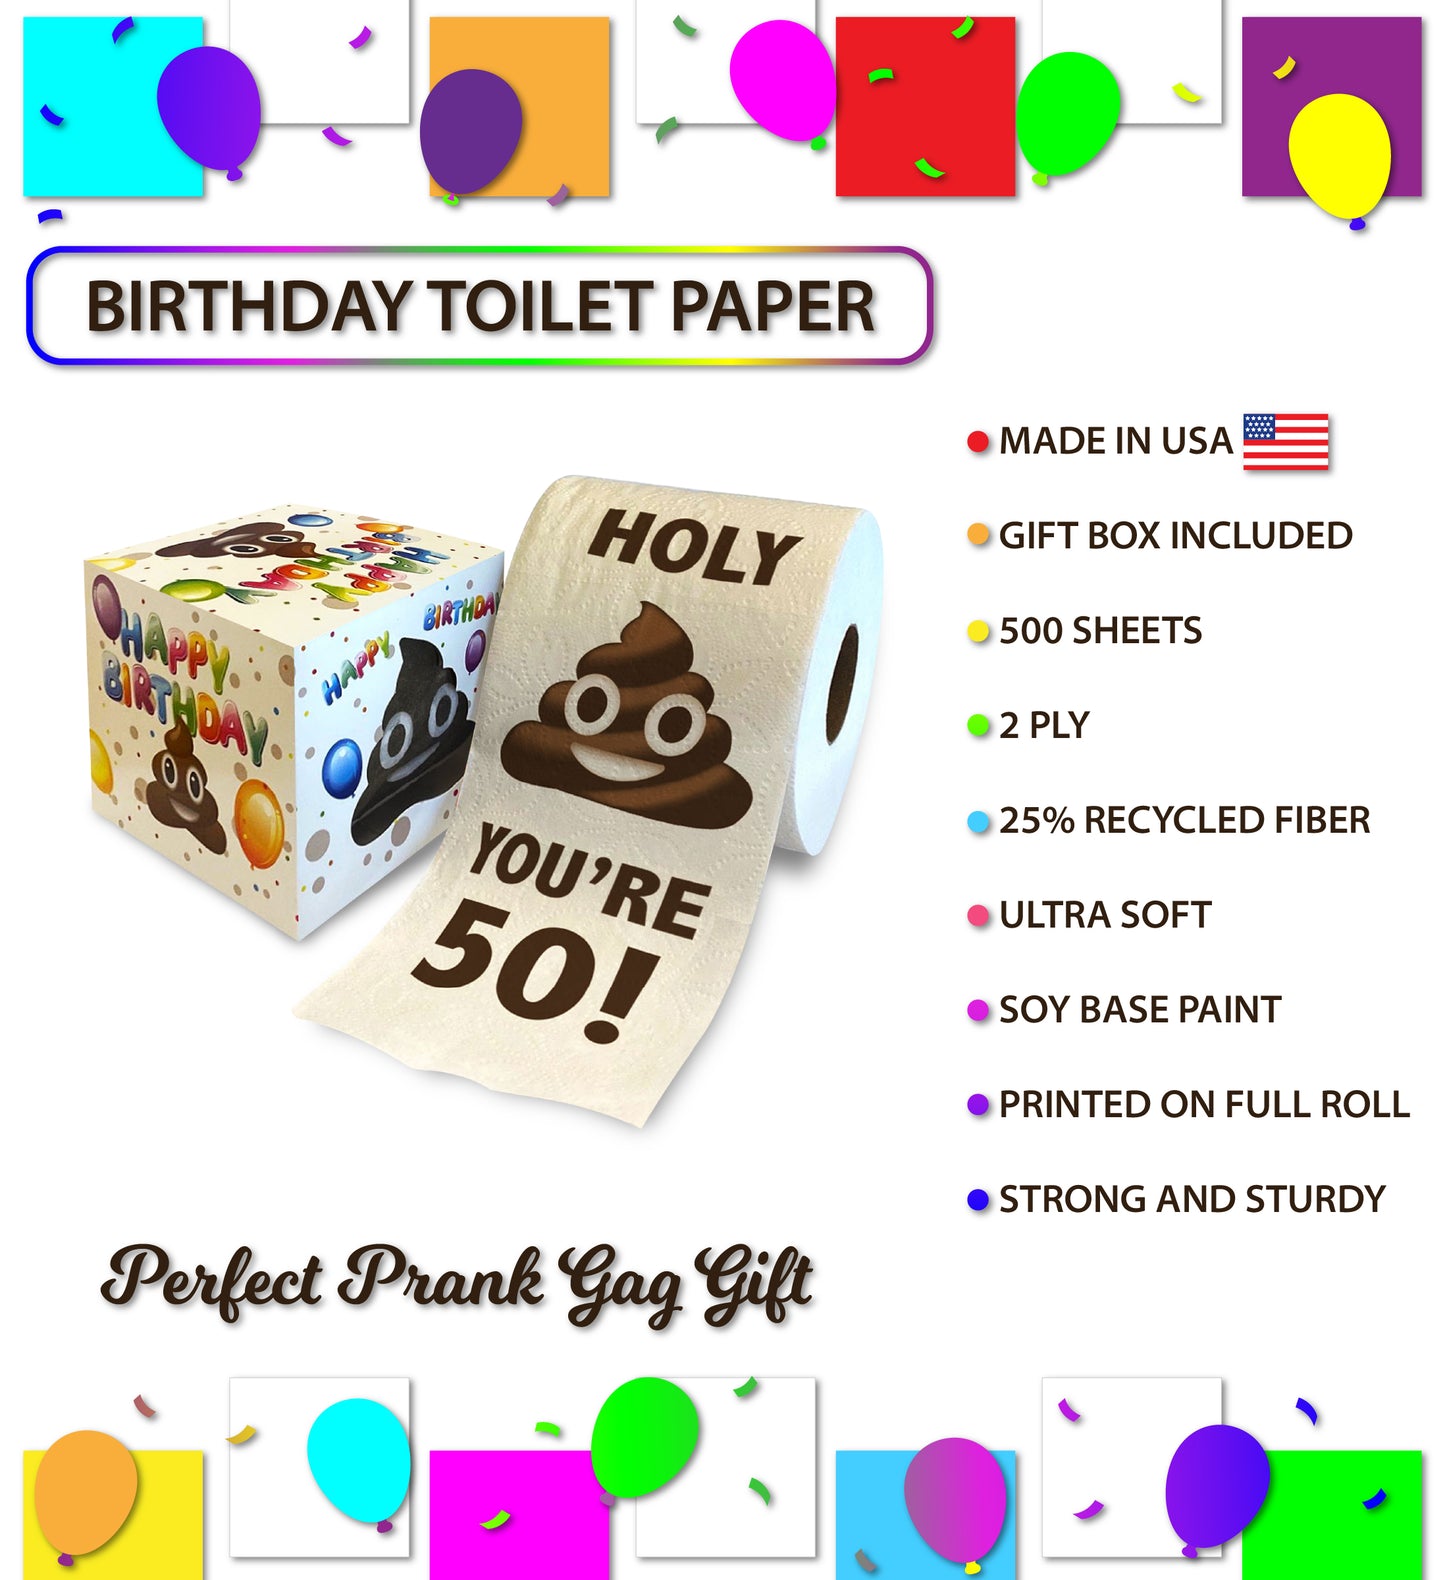 Printed TP Holy Poop You're 50 Funny Toilet Paper Roll Birthday Party Gag Gift